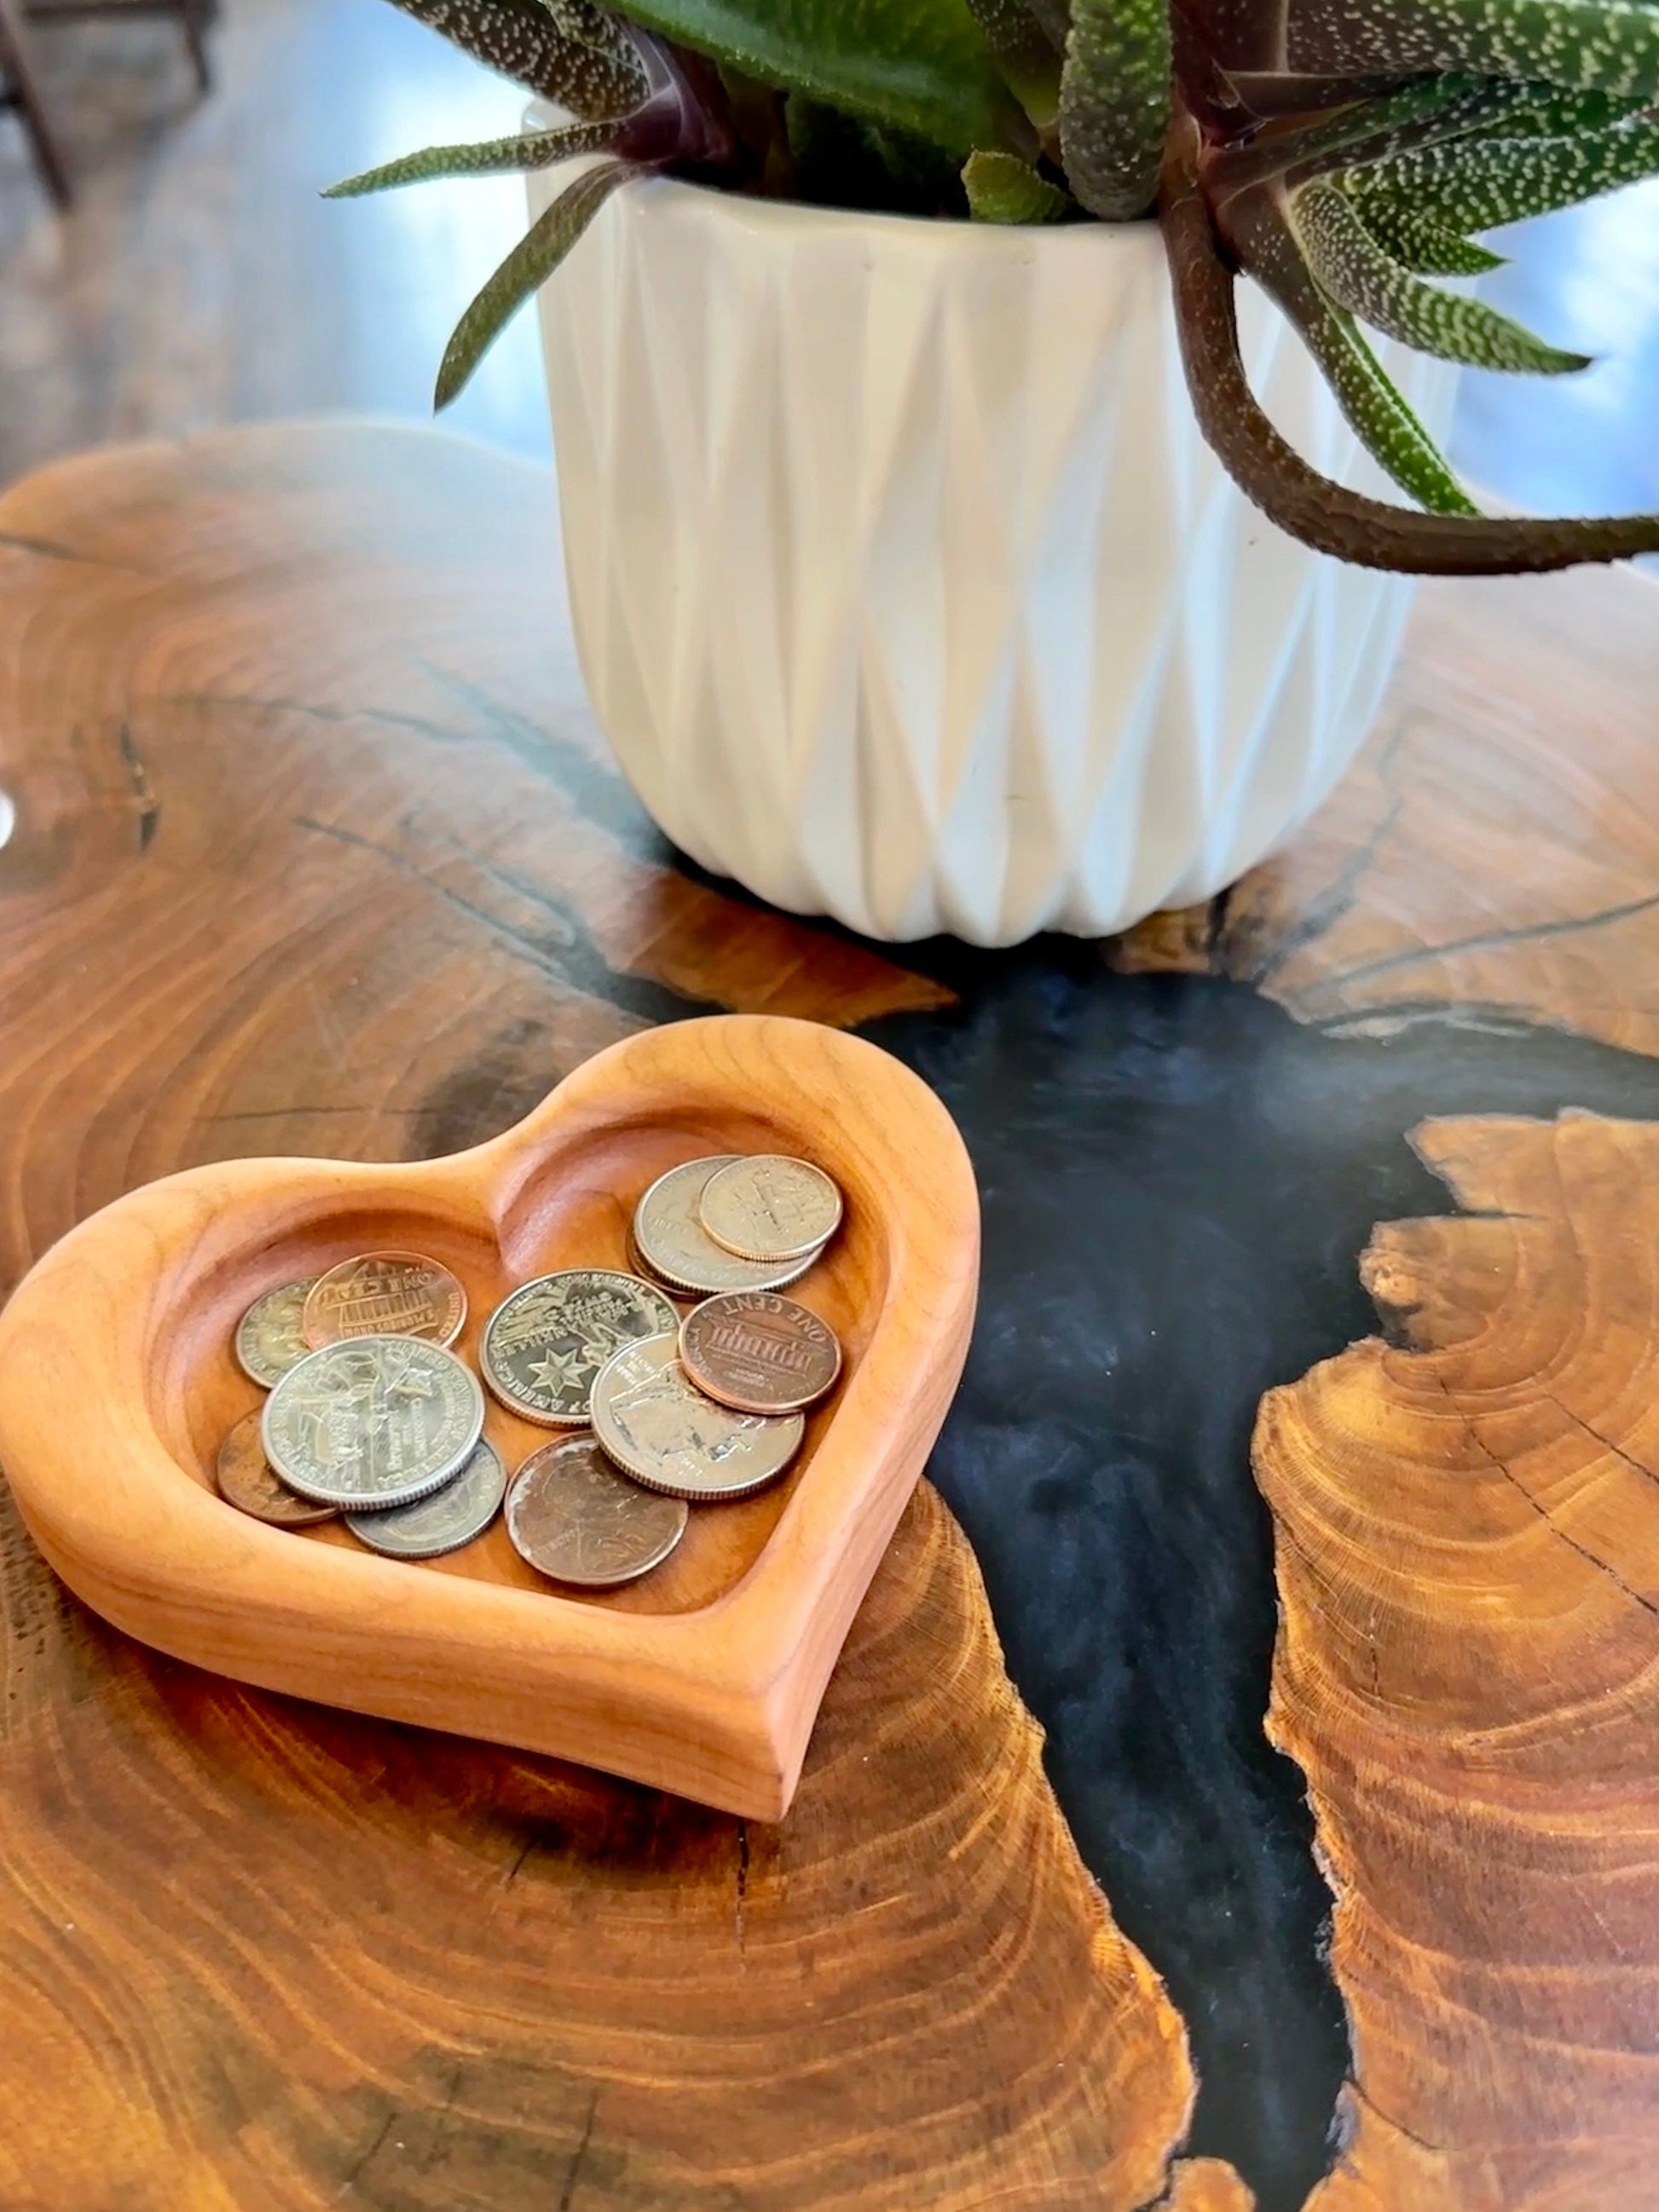 Catch All Heart Tray With Coins